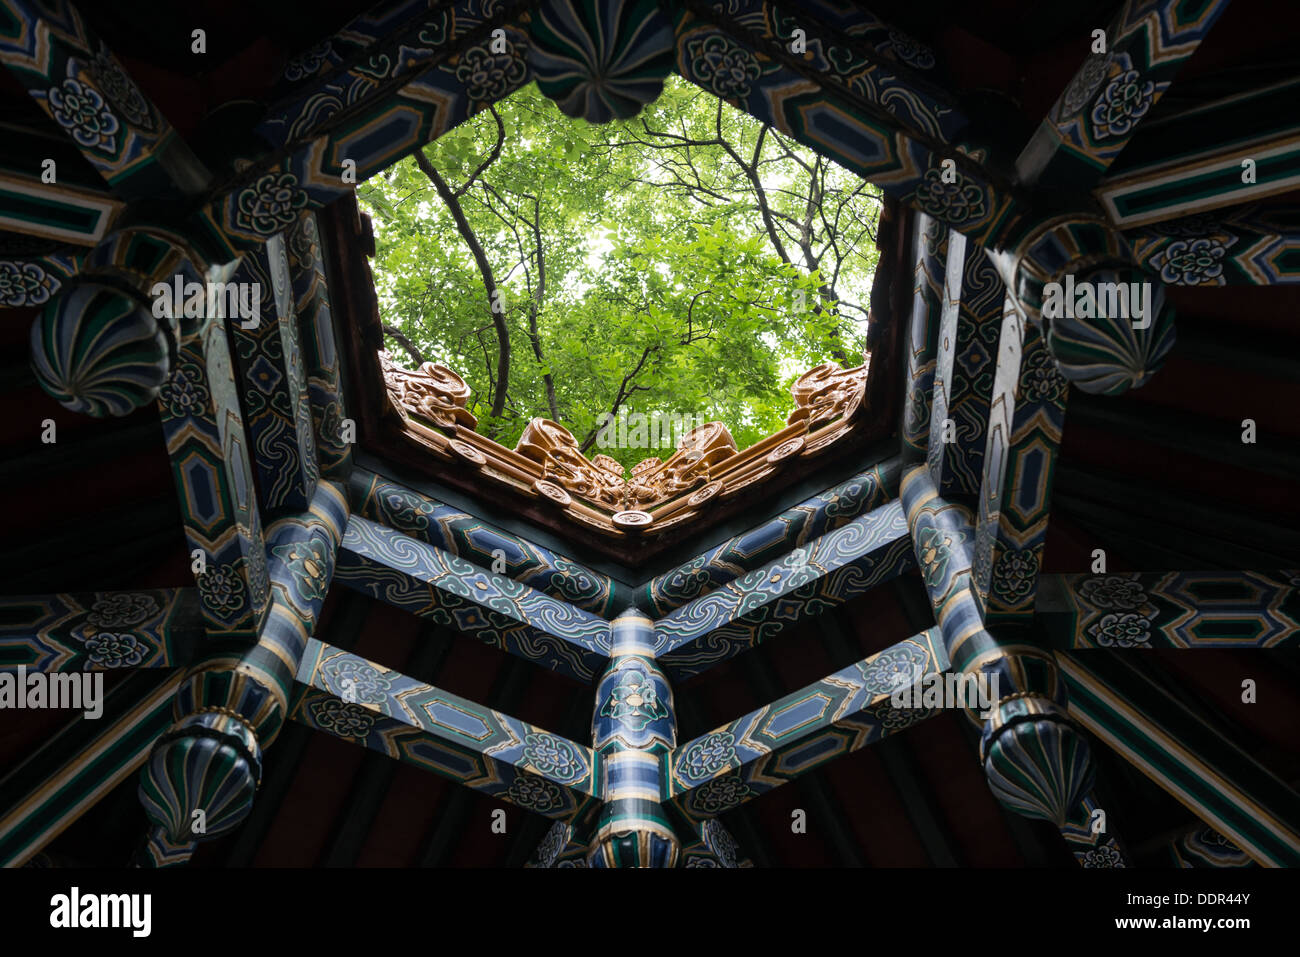 Ming Tombs, Nanjing, China. Roof of a small pavilion in the park surrounding the tombs. Stock Photo